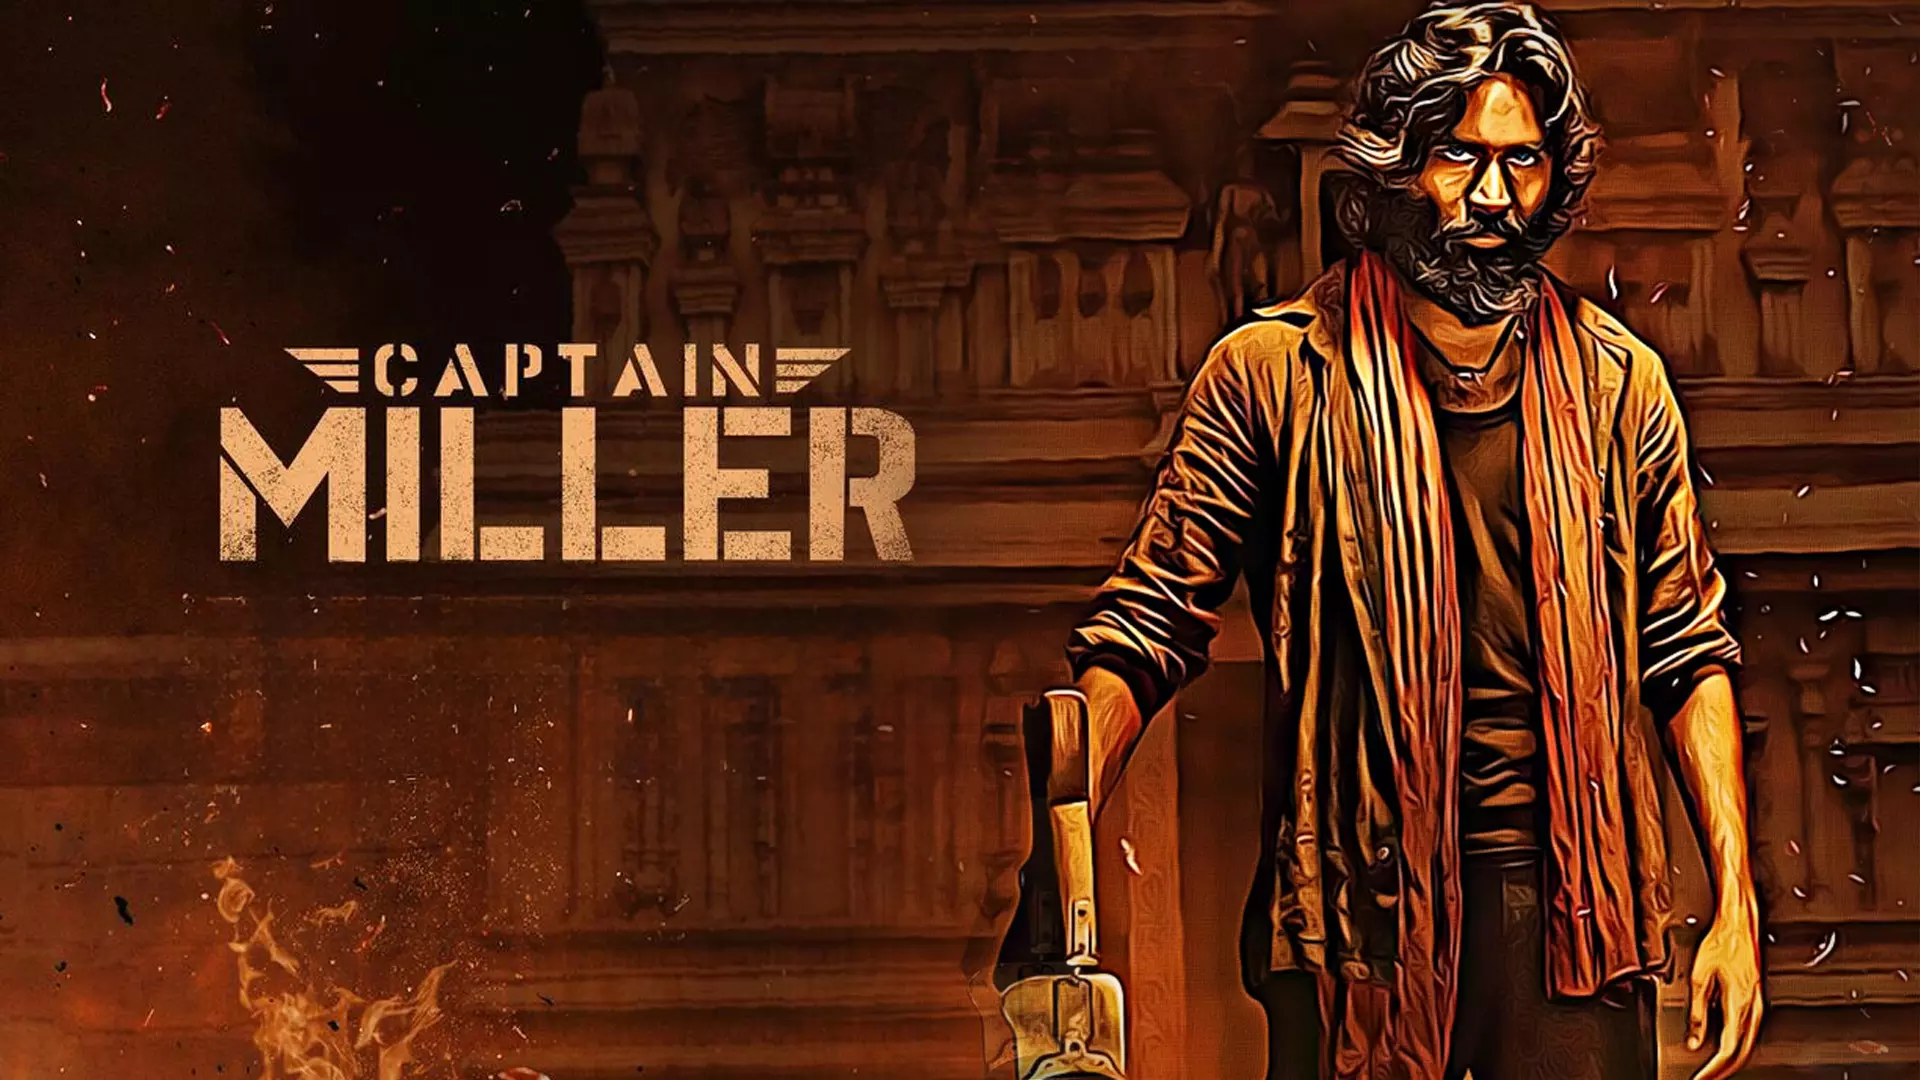 Captain Miller review: A gripping, revolutionary tale with Tarantinoesque shades